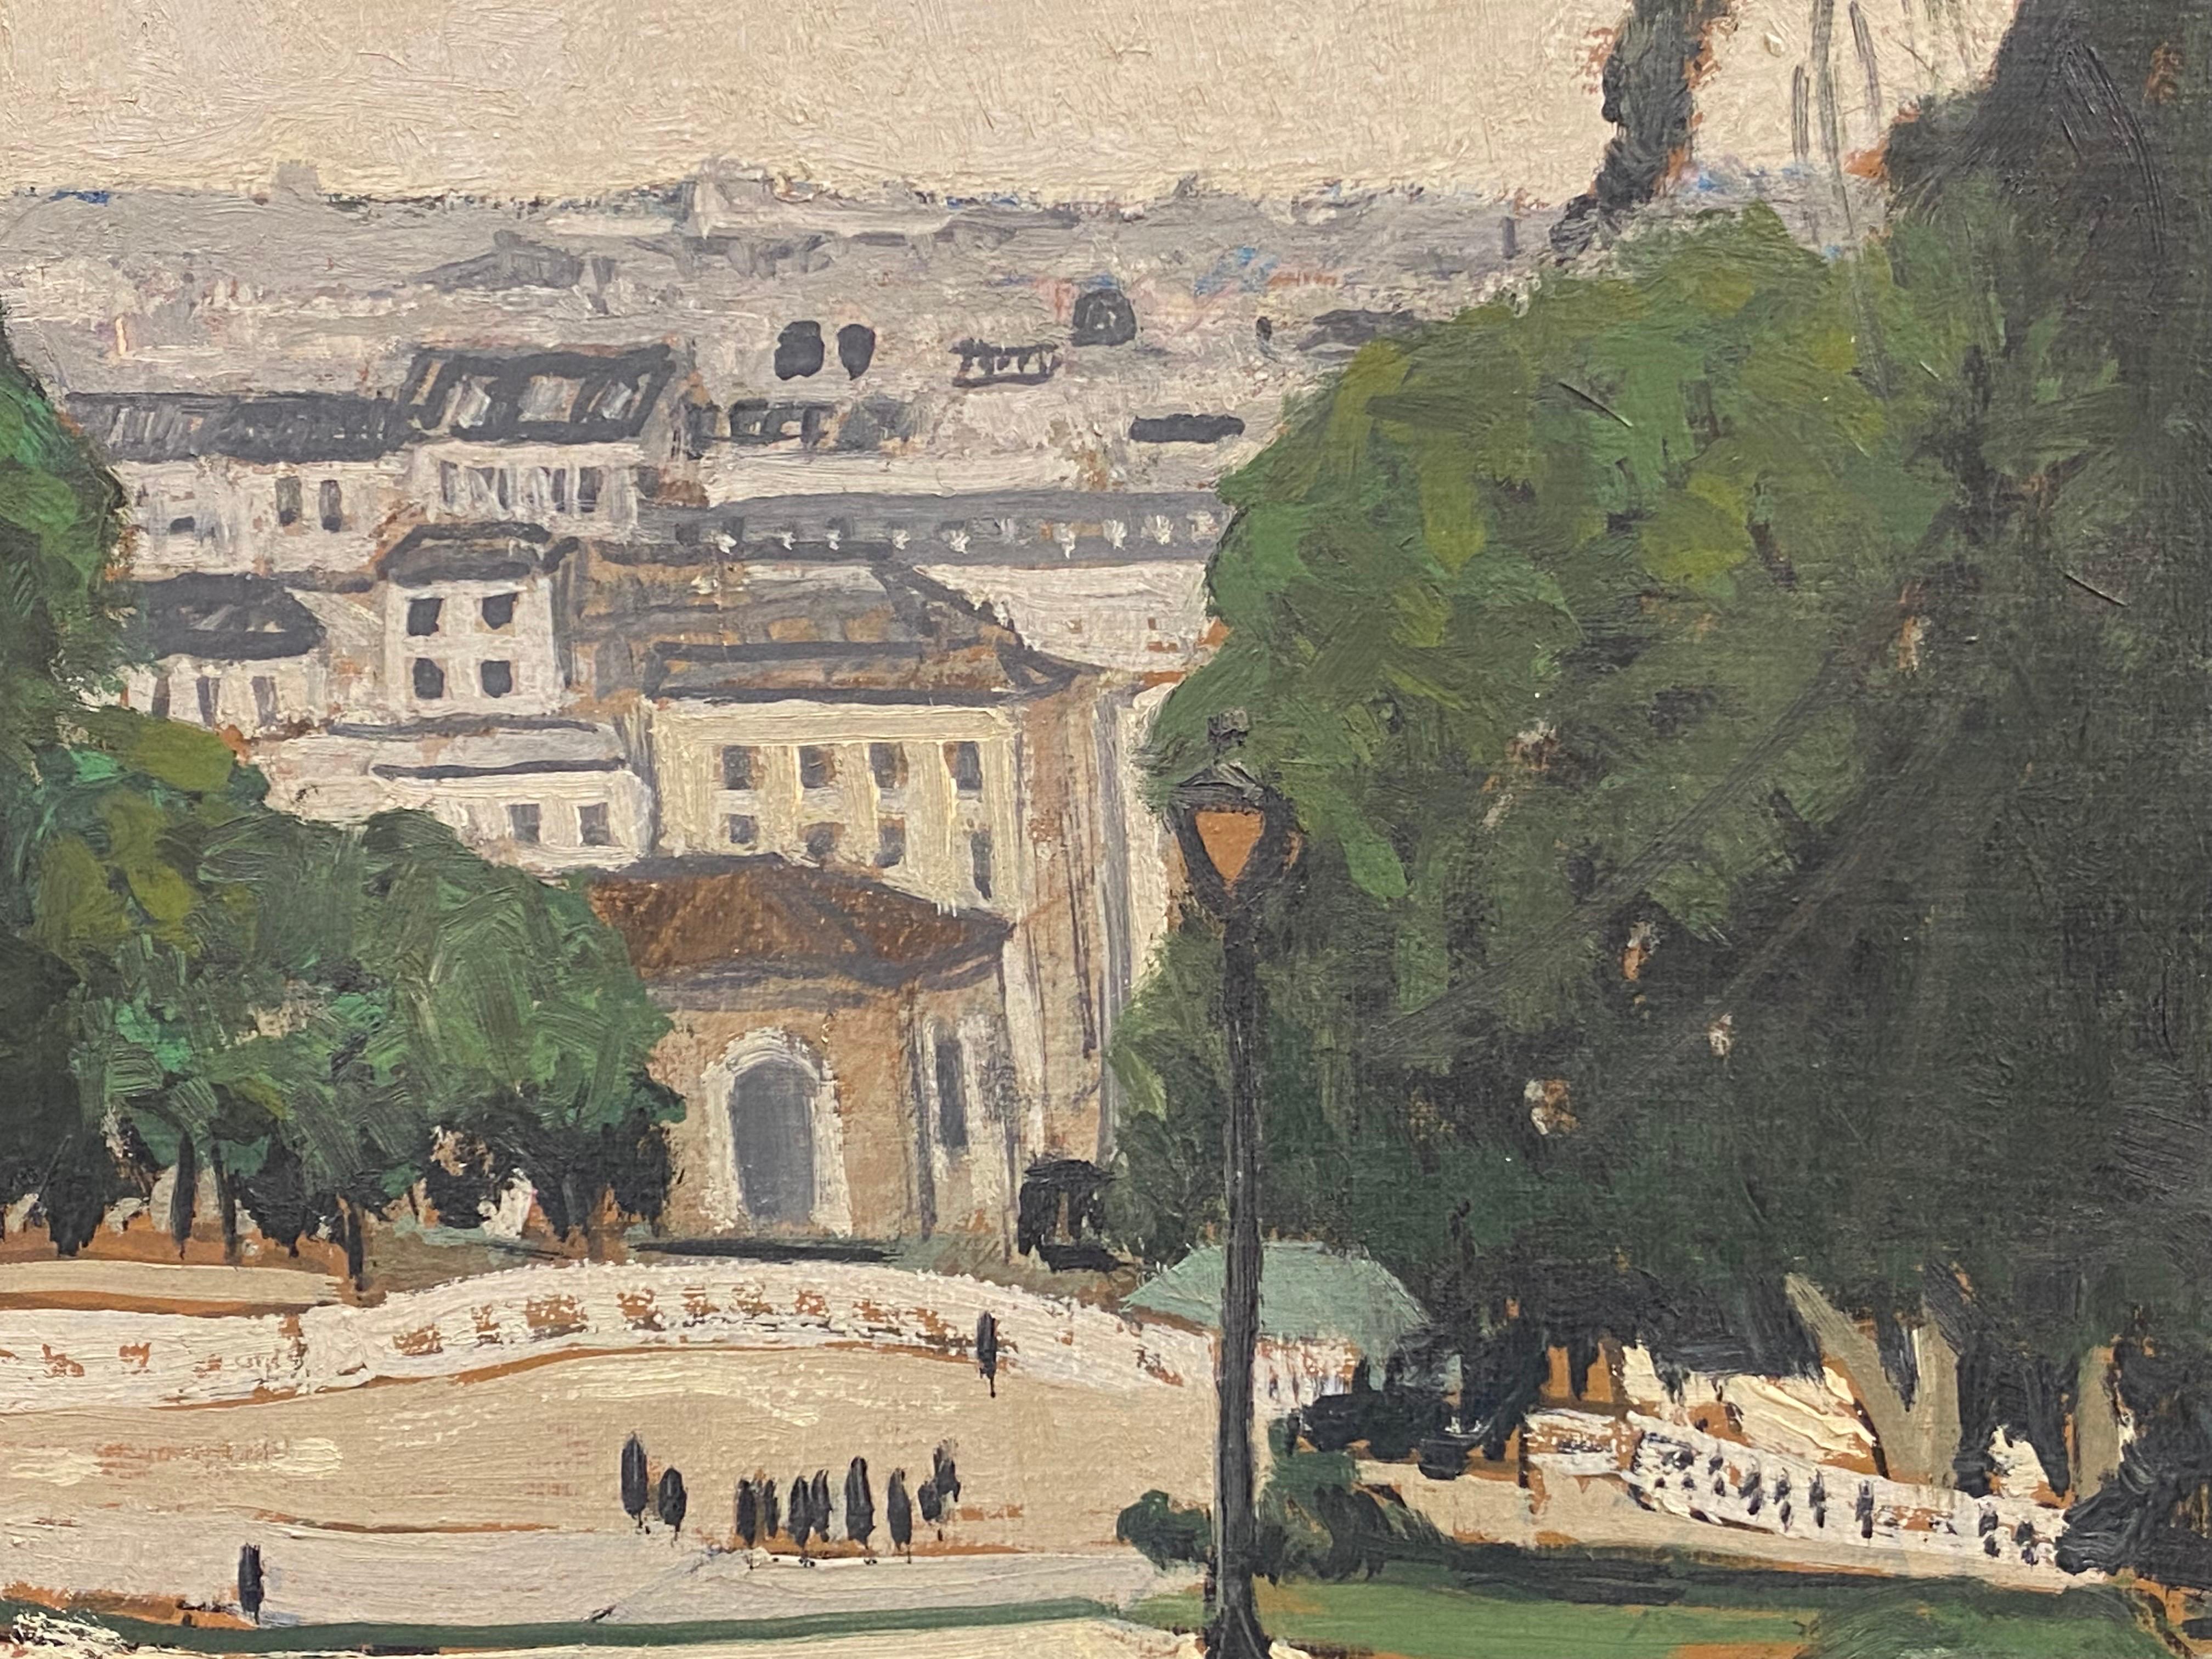 Artist/ School: Patrice Poindrelle (French b. 1954)

Title: Paris, viewed from Montmartre

Medium: oil painting on canvas, unframed.

Size:  painting: 7.5 x 9.5 inches     

Provenance: private collection, Paris. 

Condition: The painting is in very